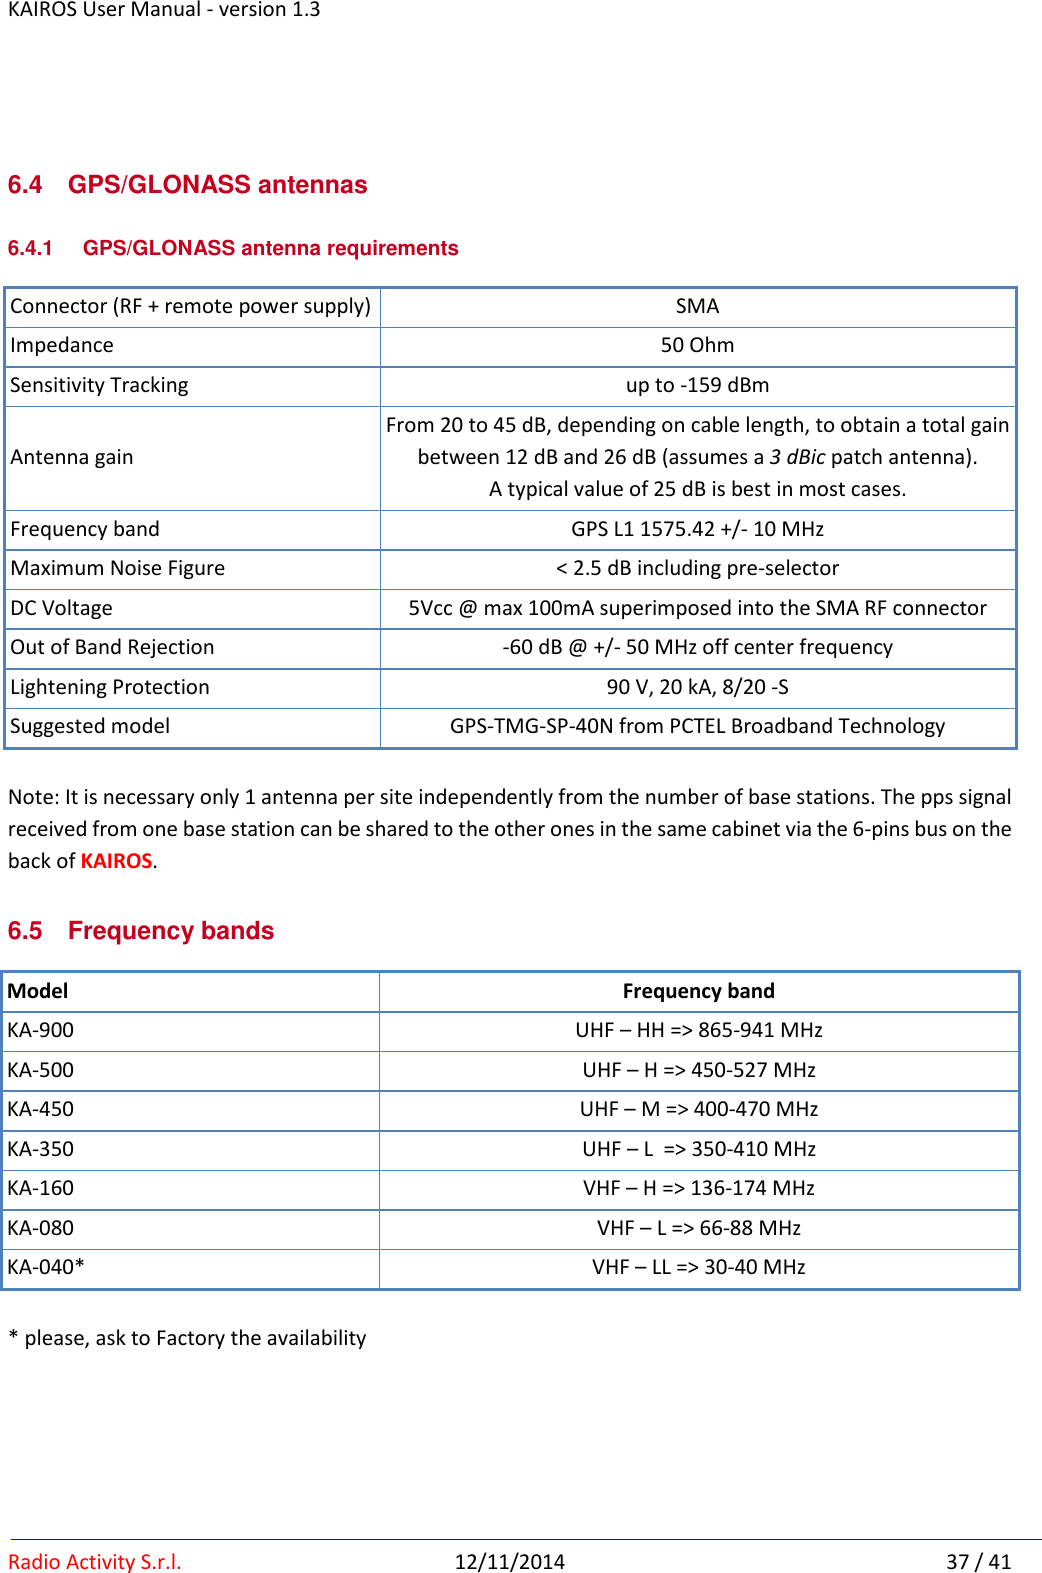 KAIROS User Manual - version 1.3   Radio Activity S.r.l.  12/11/2014  37 / 41  6.4  GPS/GLONASS antennas 6.4.1  GPS/GLONASS antenna requirements Connector (RF + remote power supply) SMA Impedance 50 Ohm Sensitivity Tracking up to -159 dBm Antenna gain From 20 to 45 dB, depending on cable length, to obtain a total gain between 12 dB and 26 dB (assumes a 3 dBic patch antenna). A typical value of 25 dB is best in most cases. Frequency band GPS L1 1575.42 +/- 10 MHz Maximum Noise Figure &lt; 2.5 dB including pre-selector DC Voltage 5Vcc @ max 100mA superimposed into the SMA RF connector Out of Band Rejection -60 dB @ +/- 50 MHz off center frequency Lightening Protection 90 V, 20 kA, 8/20 -S Suggested model GPS-TMG-SP-40N from PCTEL Broadband Technology  Note: It is necessary only 1 antenna per site independently from the number of base stations. The pps signal received from one base station can be shared to the other ones in the same cabinet via the 6-pins bus on the back of KAIROS. 6.5  Frequency bands Model Frequency band KA-900  UHF – HH =&gt; 865-941 MHz KA-500  UHF – H =&gt; 450-527 MHz KA-450  UHF – M =&gt; 400-470 MHz KA-350 UHF – L  =&gt; 350-410 MHz KA-160 VHF – H =&gt; 136-174 MHz KA-080 VHF – L =&gt; 66-88 MHz KA-040* VHF – LL =&gt; 30-40 MHz  * please, ask to Factory the availability    